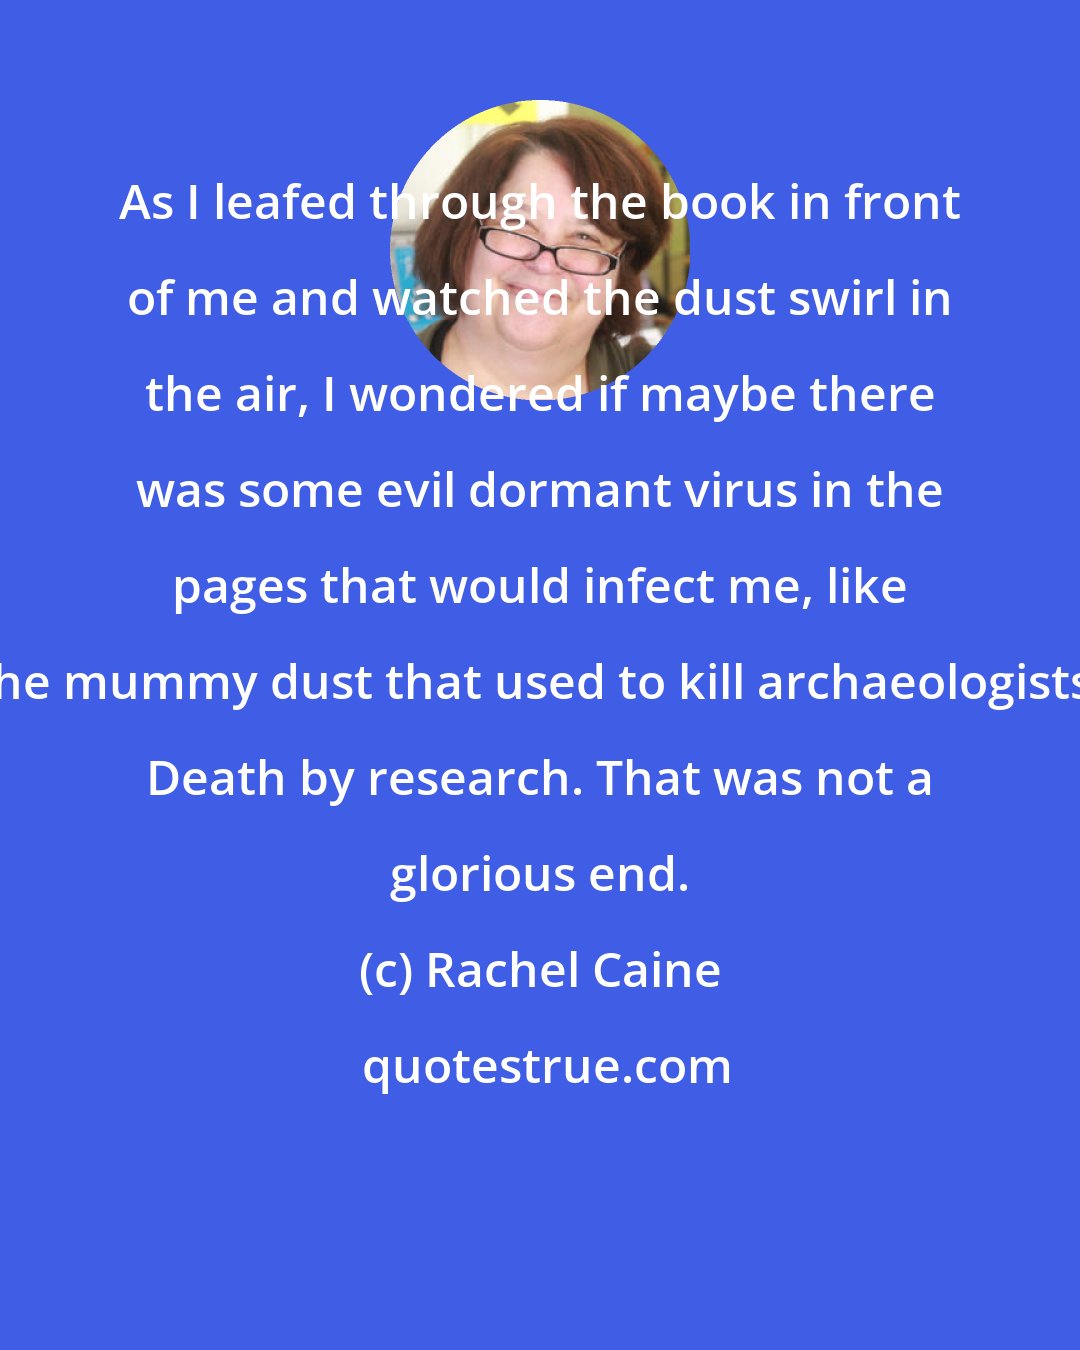 Rachel Caine: As I leafed through the book in front of me and watched the dust swirl in the air, I wondered if maybe there was some evil dormant virus in the pages that would infect me, like the mummy dust that used to kill archaeologists. Death by research. That was not a glorious end.